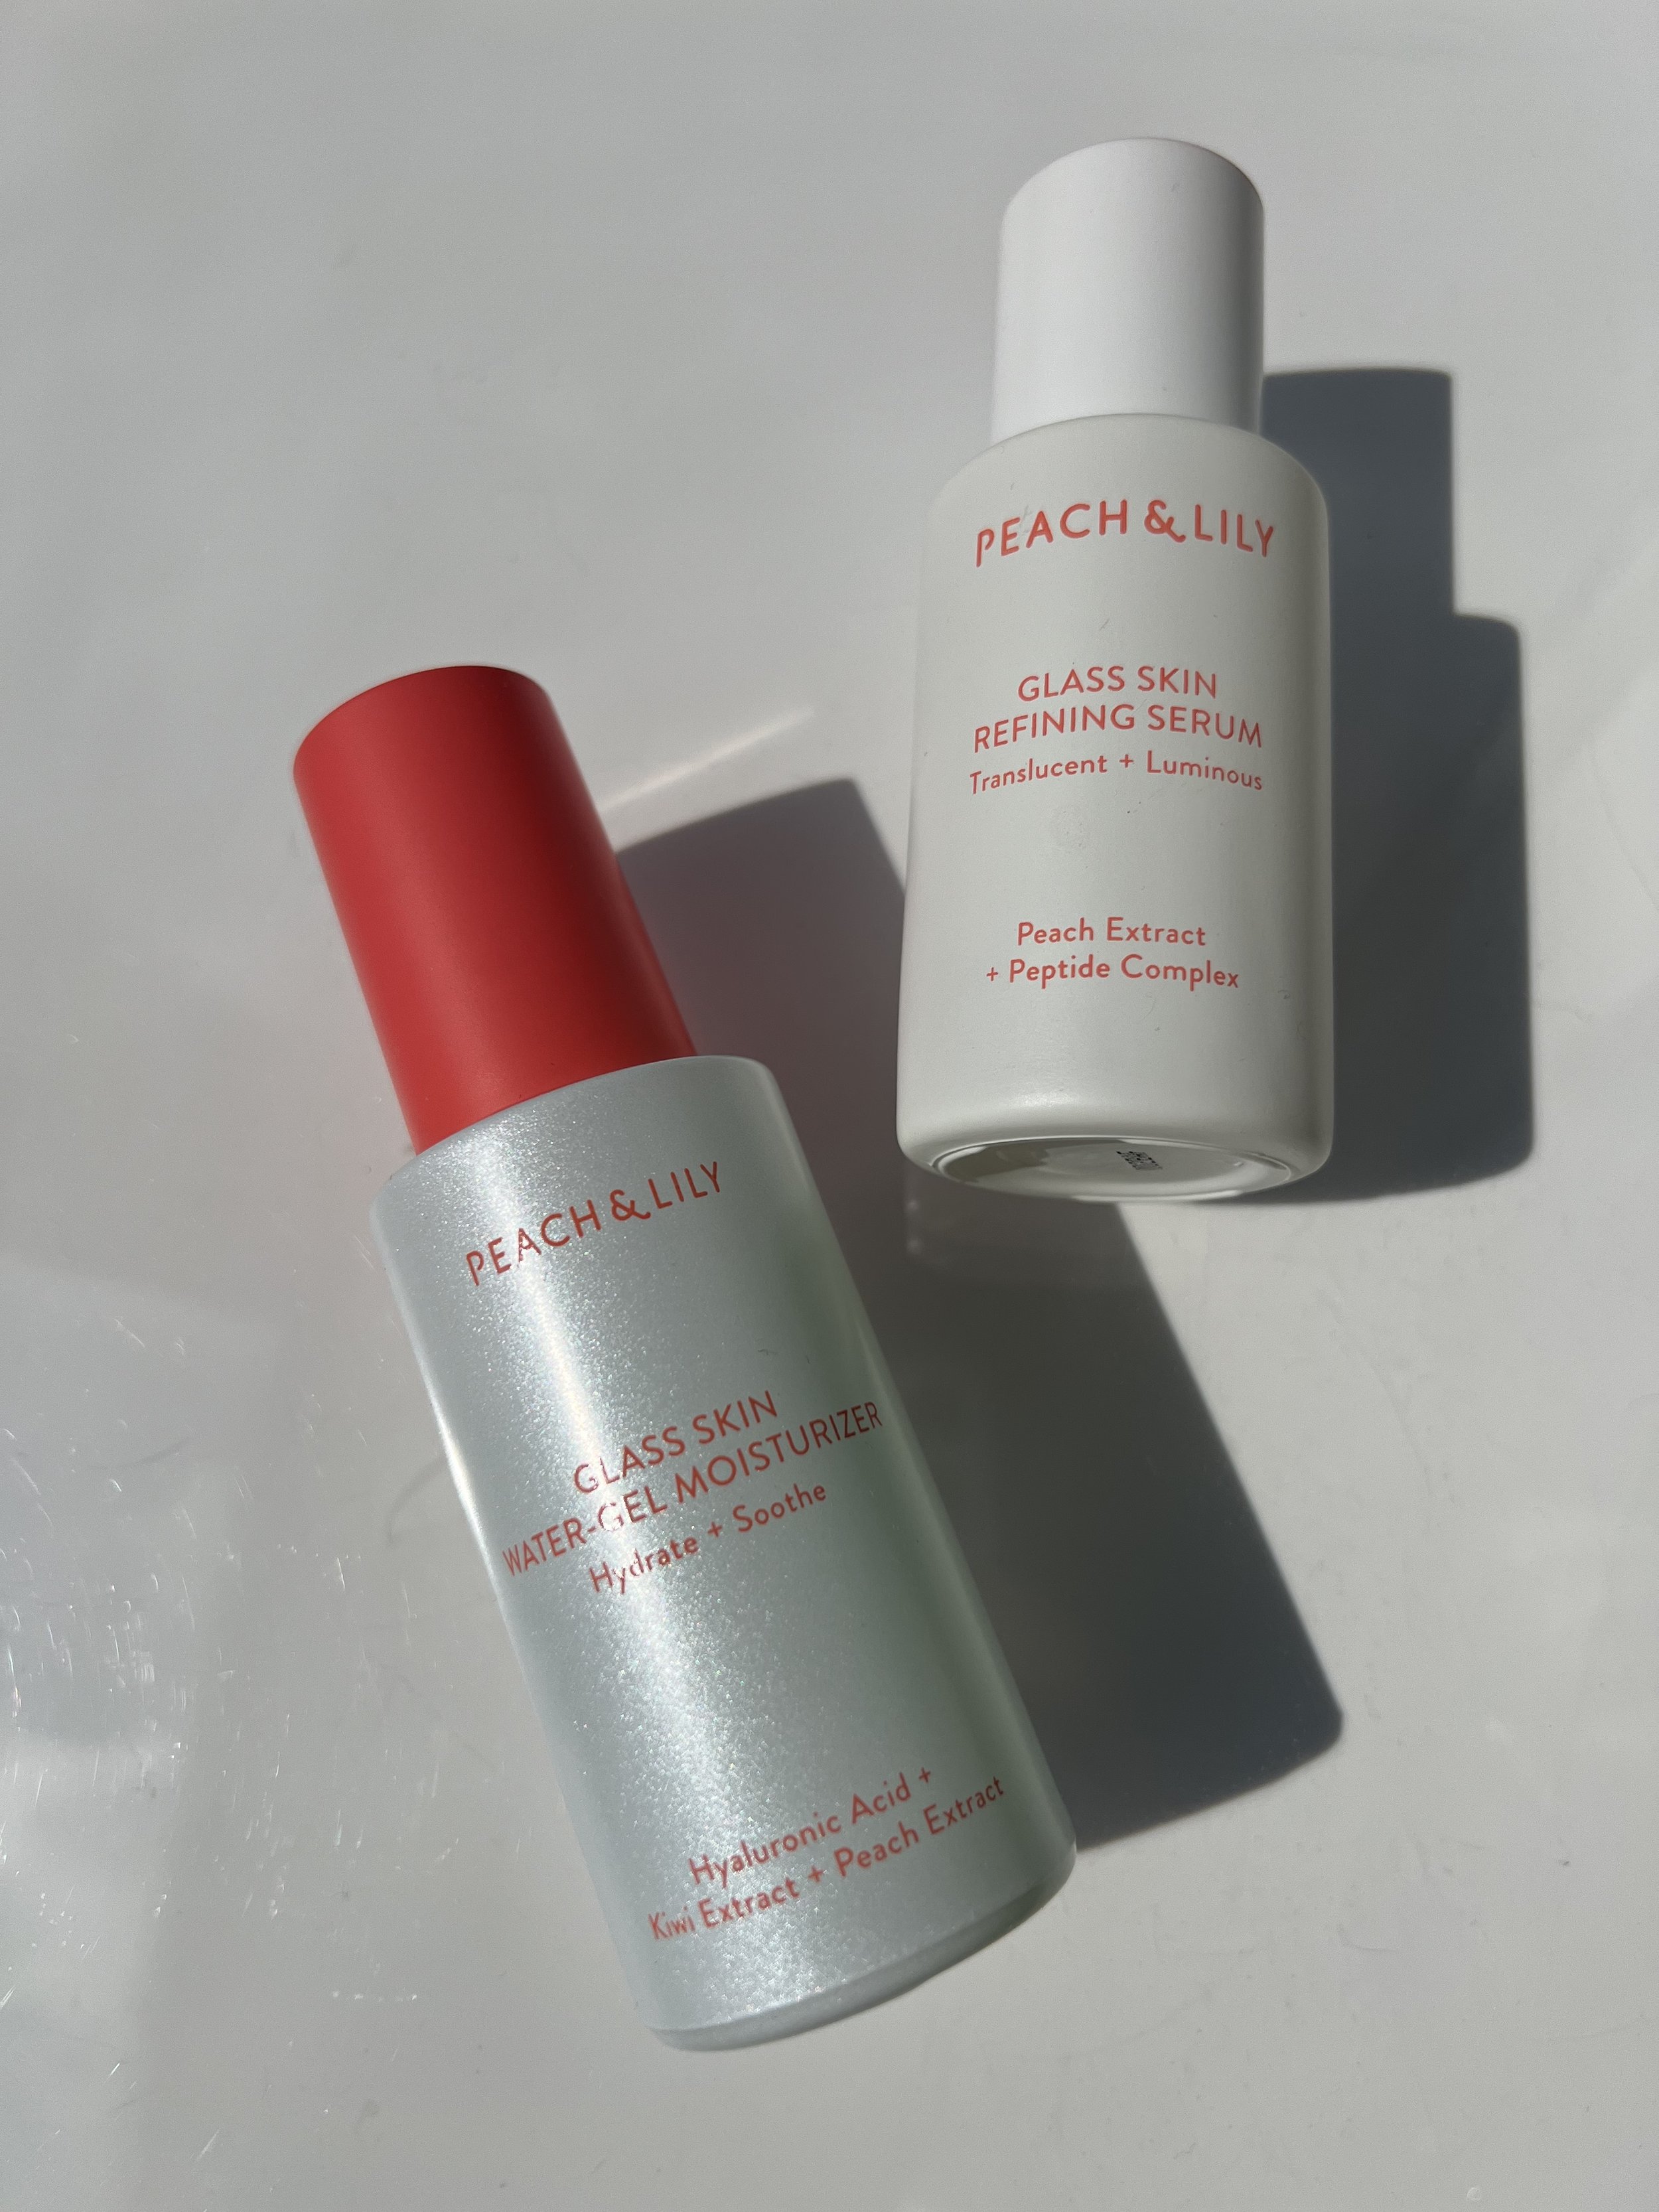 HOW TO GET GLASS SKIN WITH THE PEACH & LILY GLASS SKIN REFINING SERUM –  BEST NIACINAMIDE SERUM